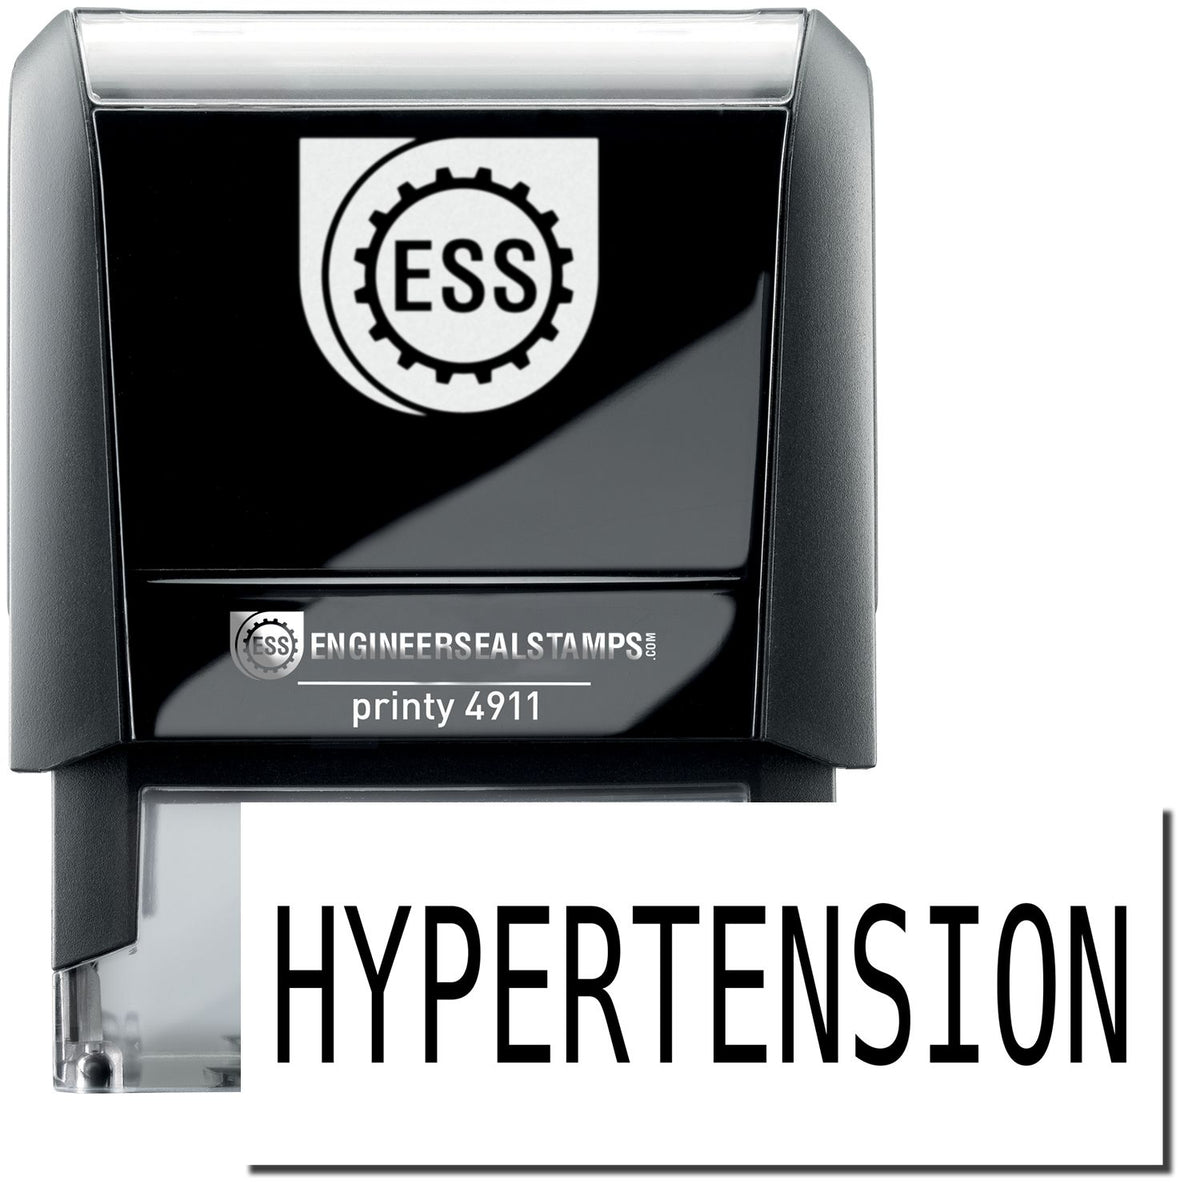 A self-inking stamp with a stamped image showing how the text &quot;HYPERTENSION&quot; is displayed after stamping.